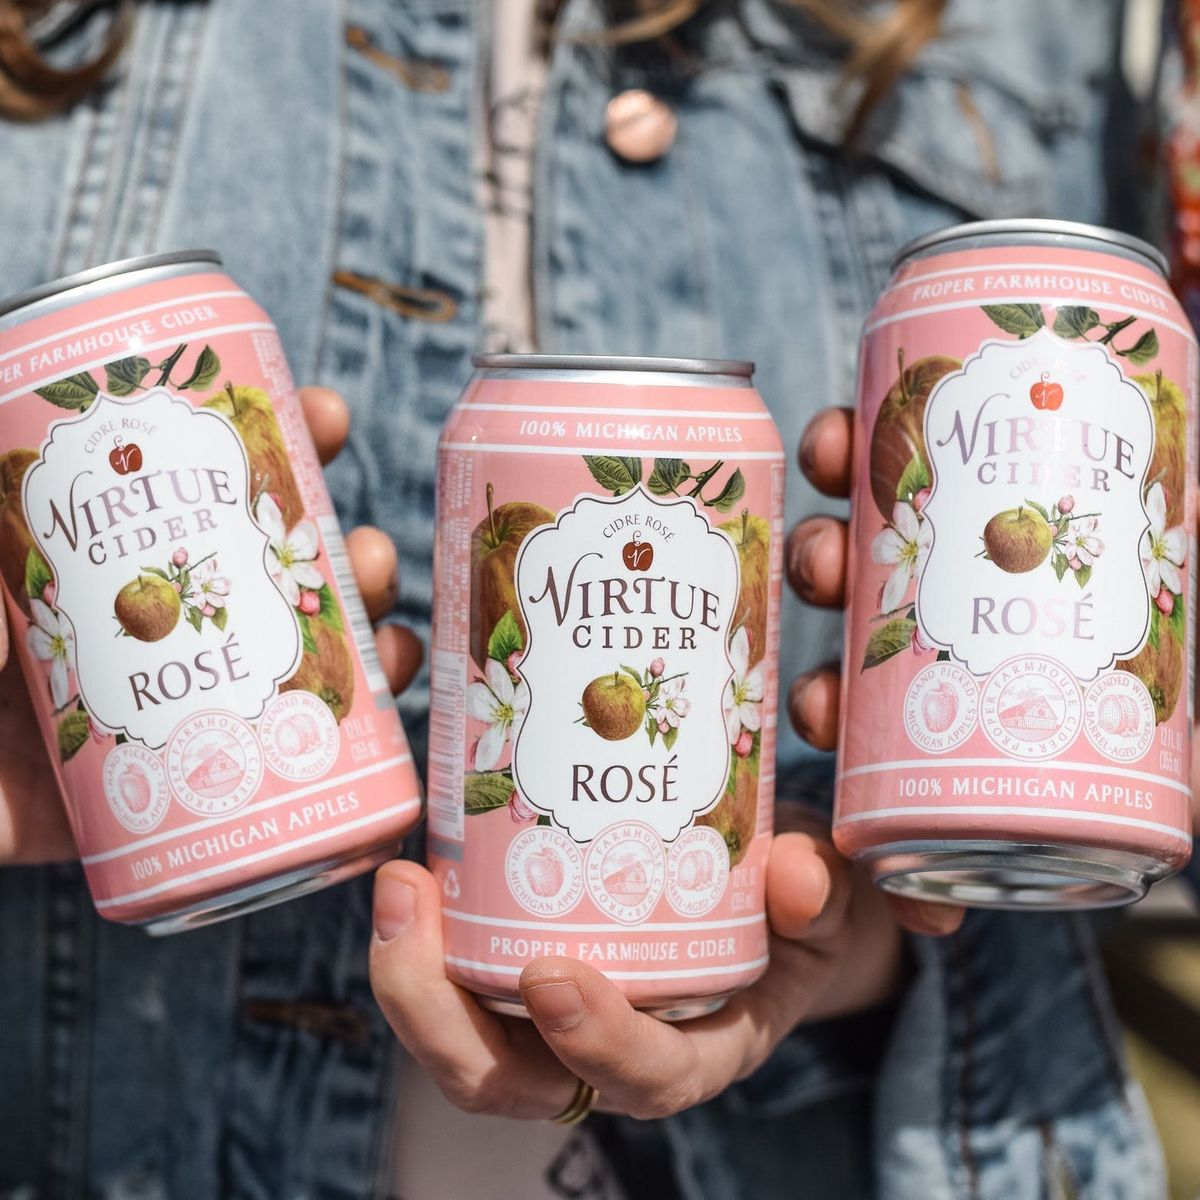 12 Refreshing Ciders to Try if You Don’t Like Beer